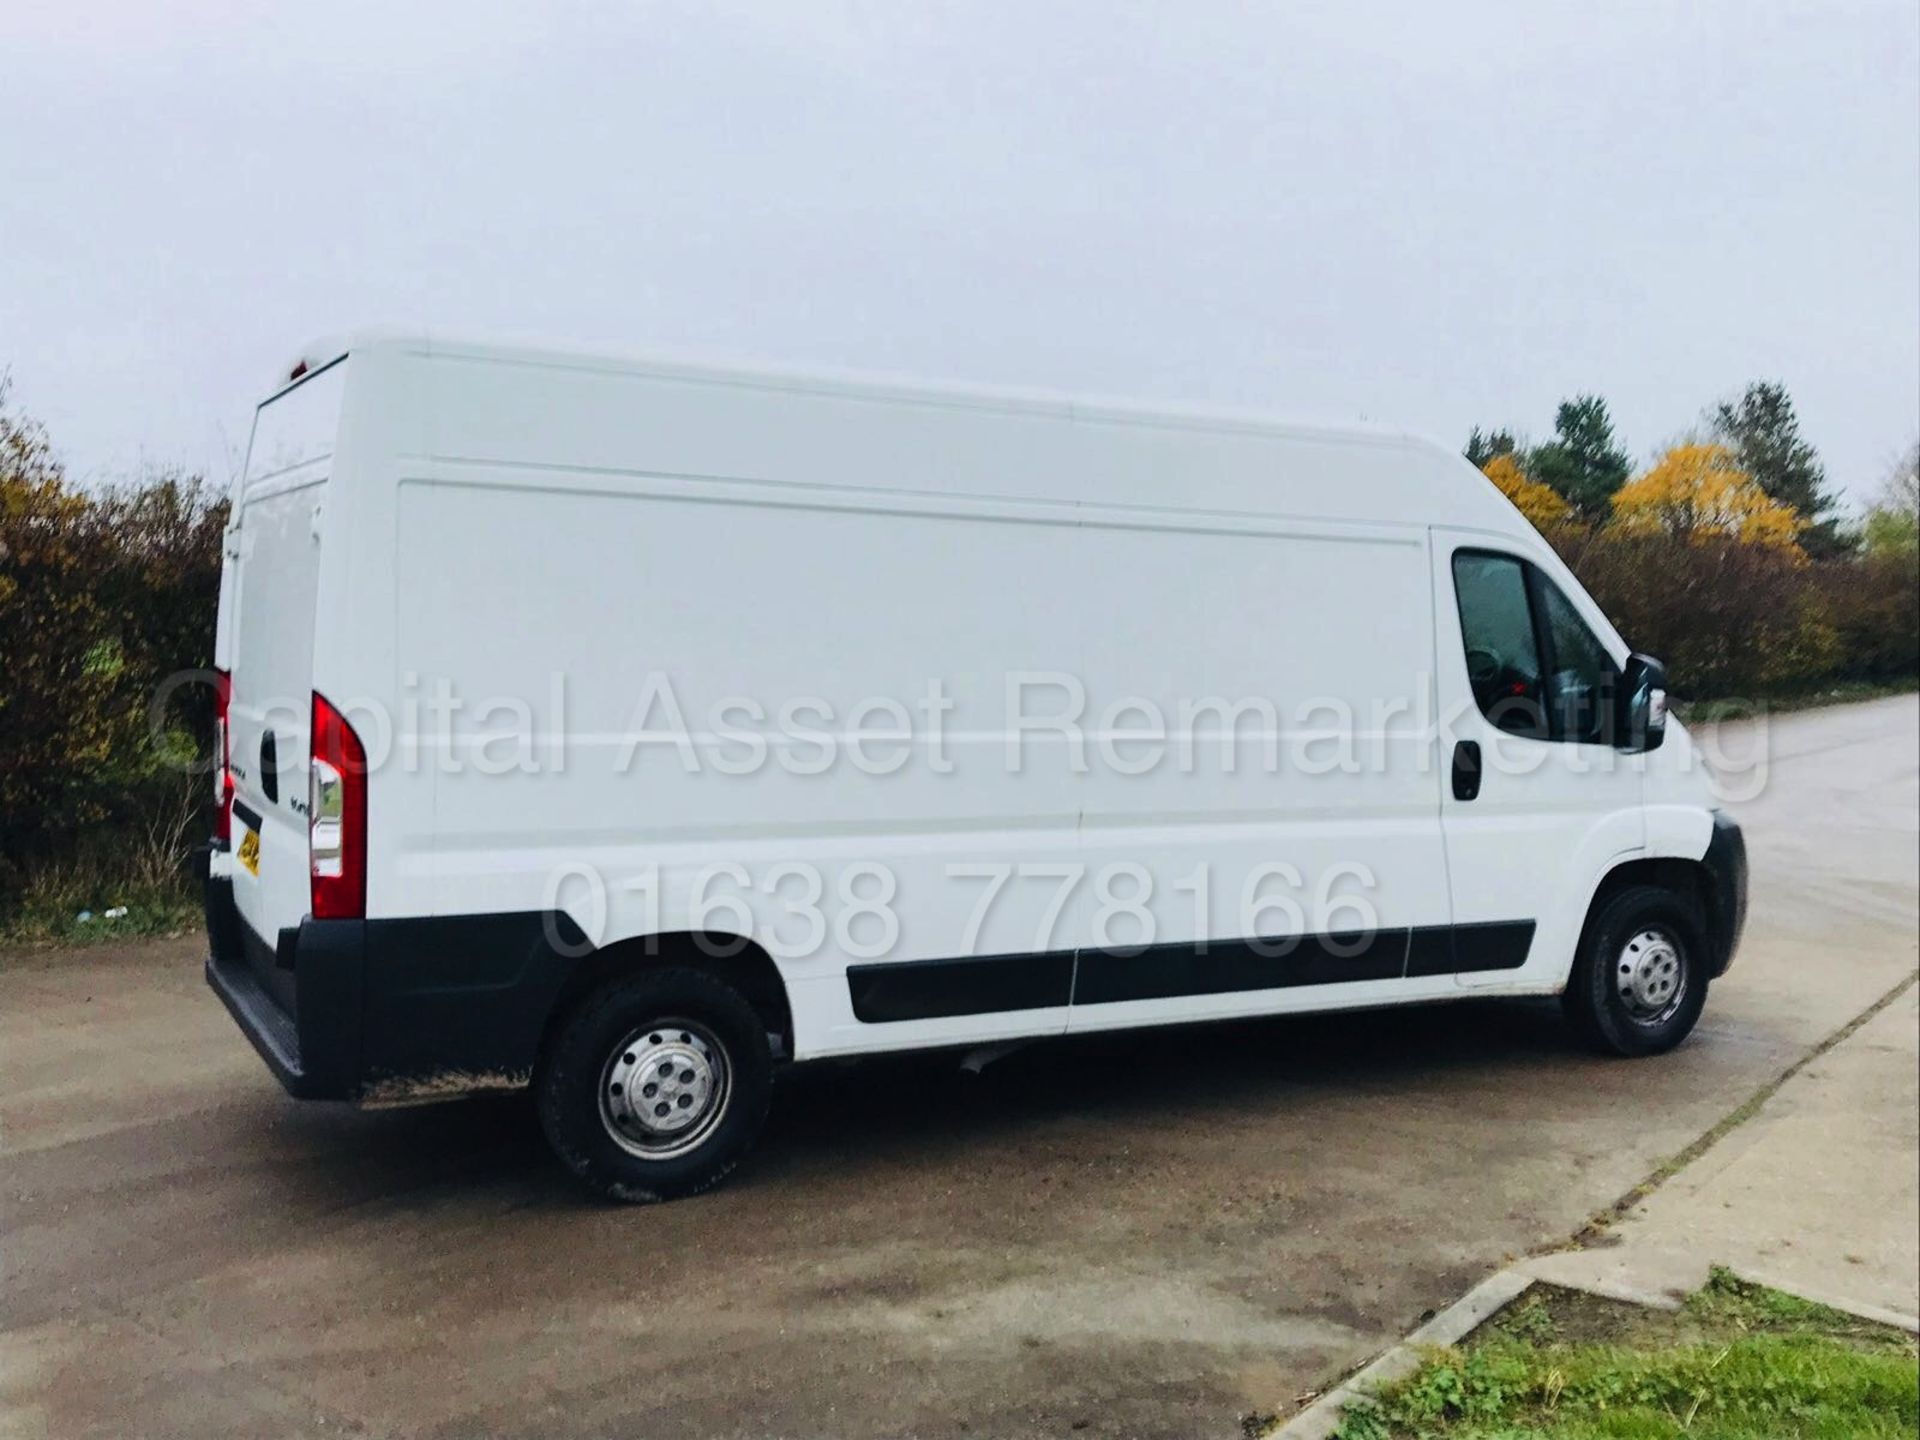 (On Sale) PEUGEOT BOXER 335 LWB HI-ROOF (2014) '2.2 HDI - 130 BHP- 6 SPEED' (1 OWNER - FULL HISTORY) - Image 8 of 19